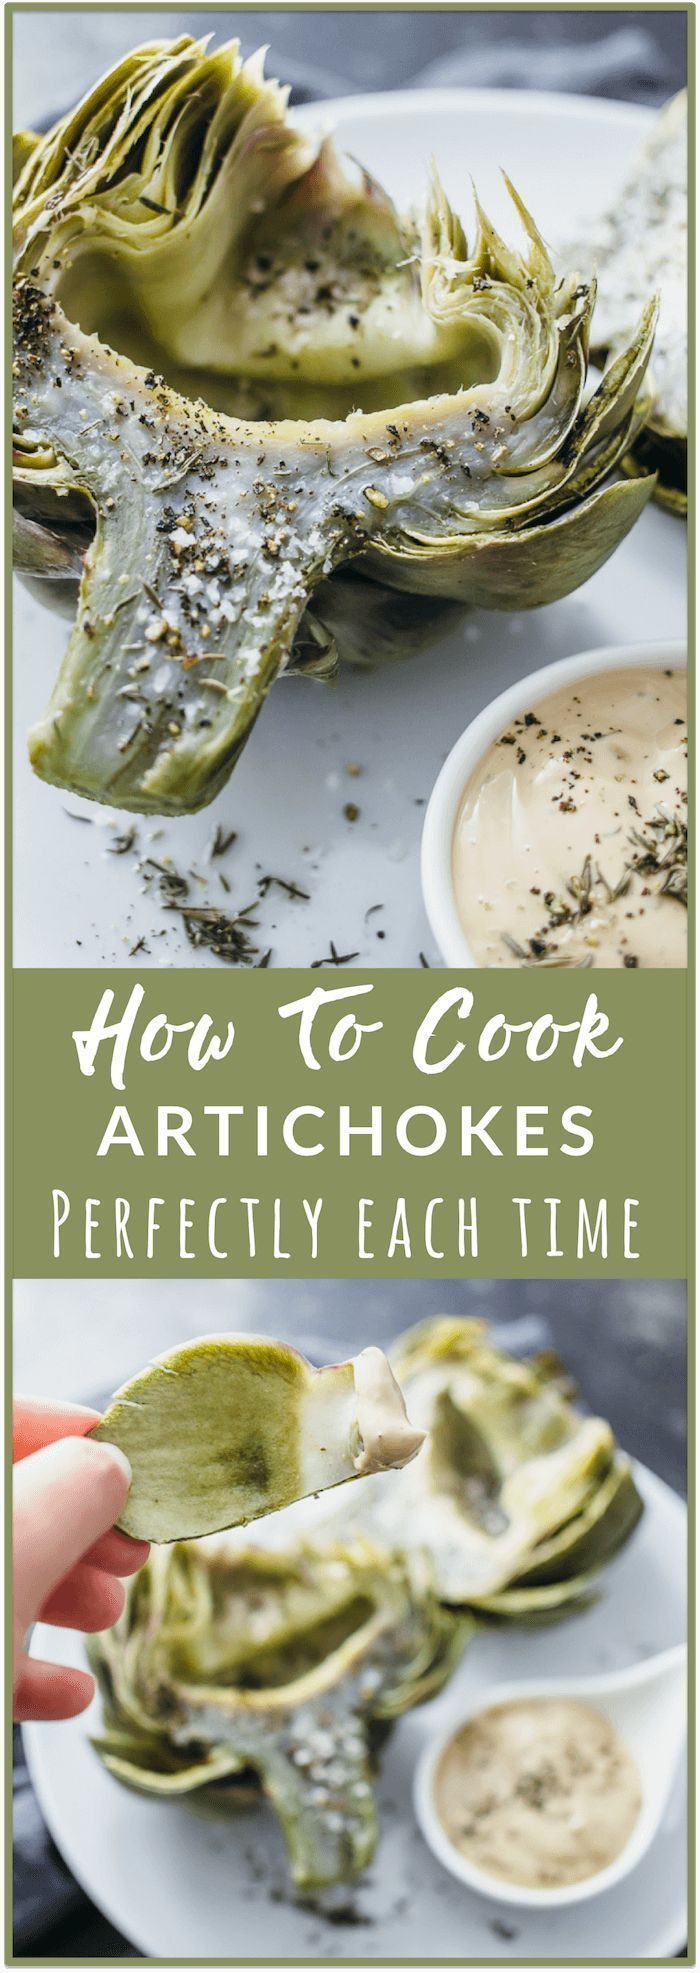 How to cook artichokes perfectly each time – Heres the perfect foolproof recipe on